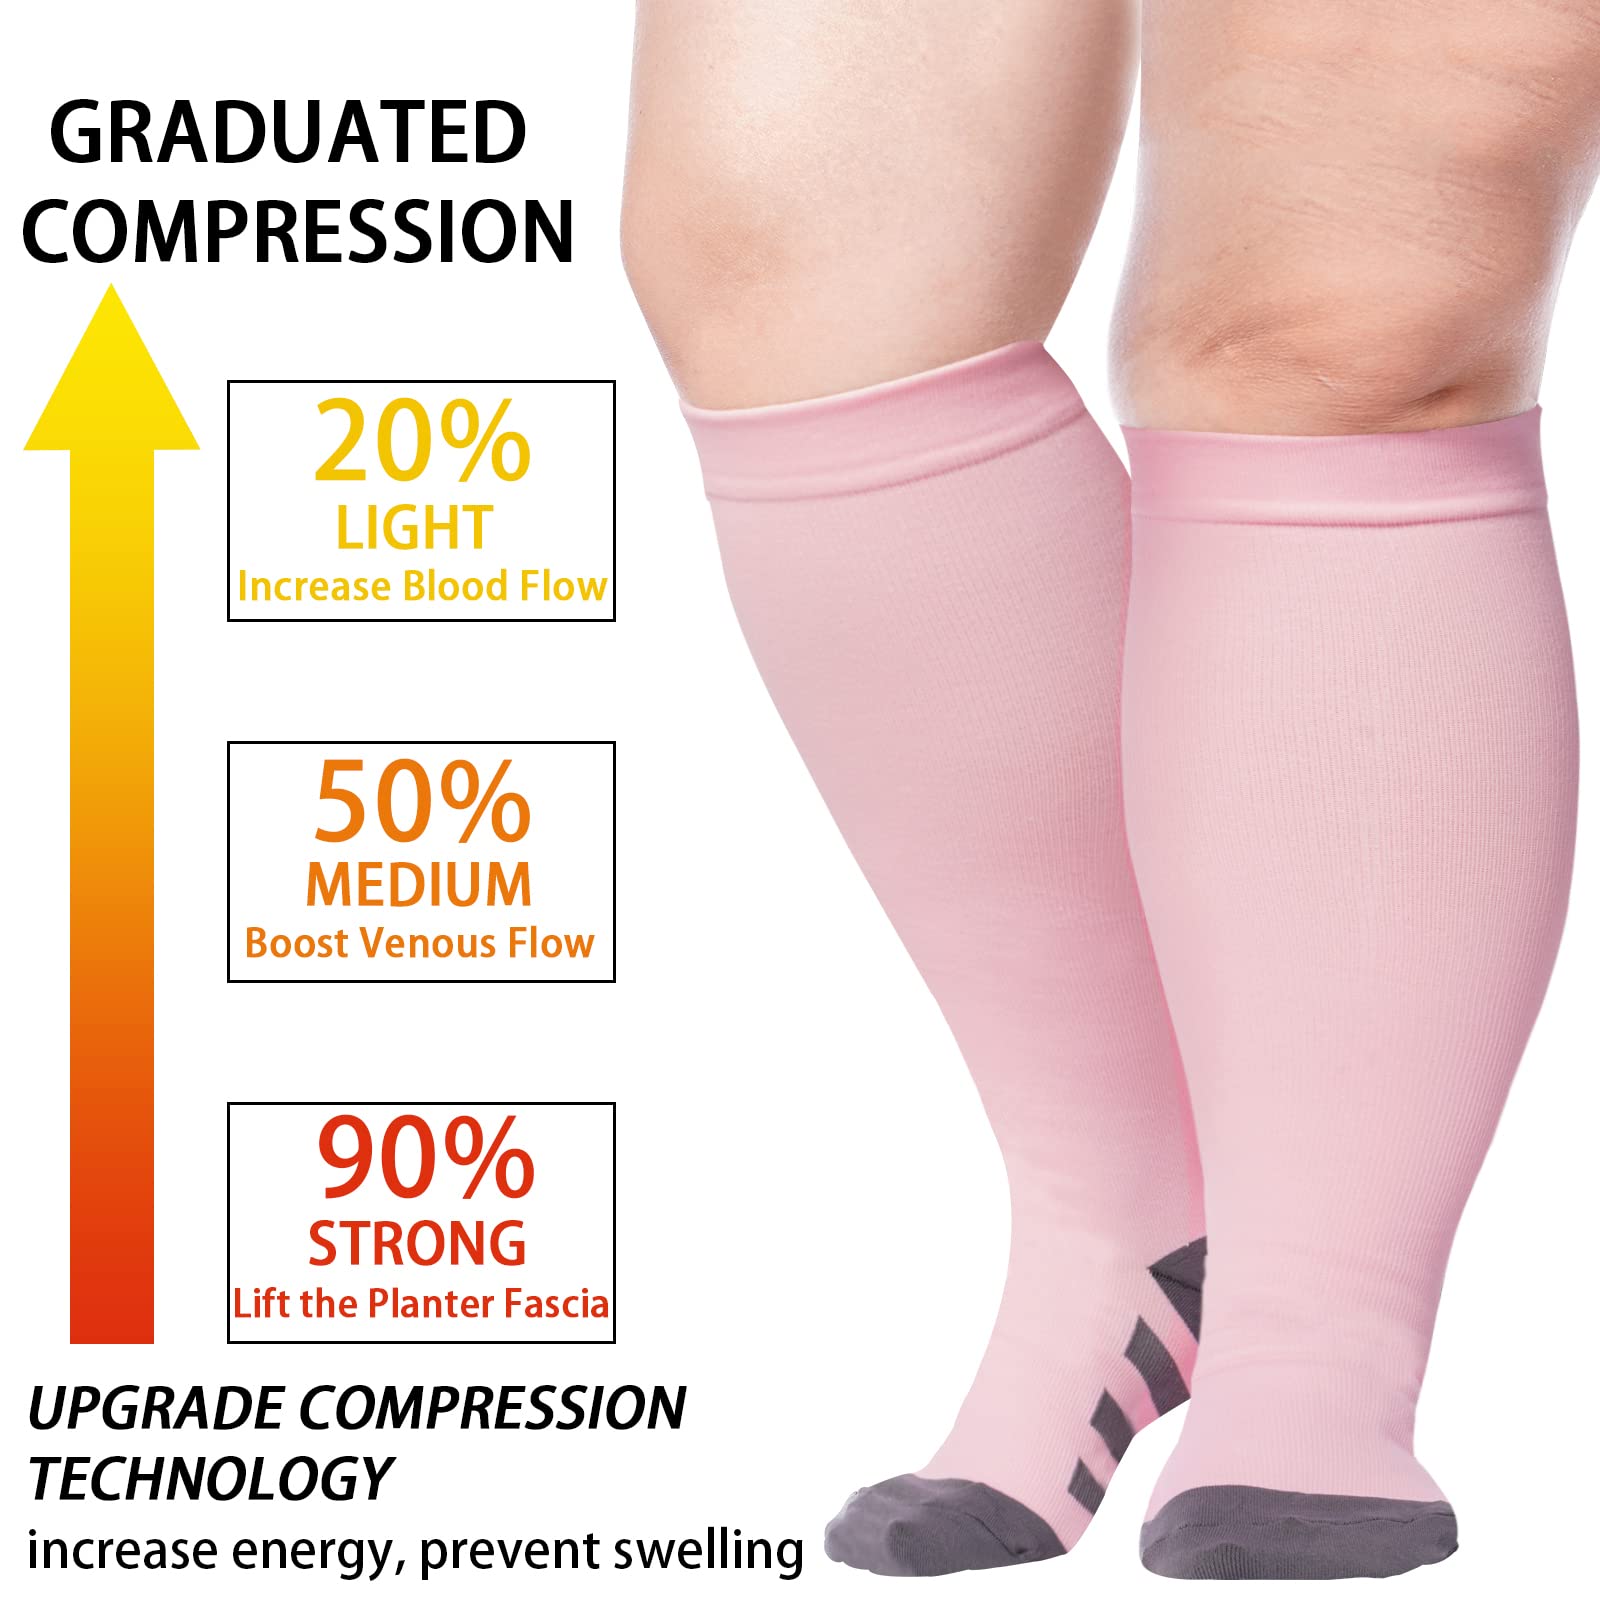 3 Pairs Plus Size Knee High Compression Socks for Women & Men-Black,Pink,Blue - Moon Wood